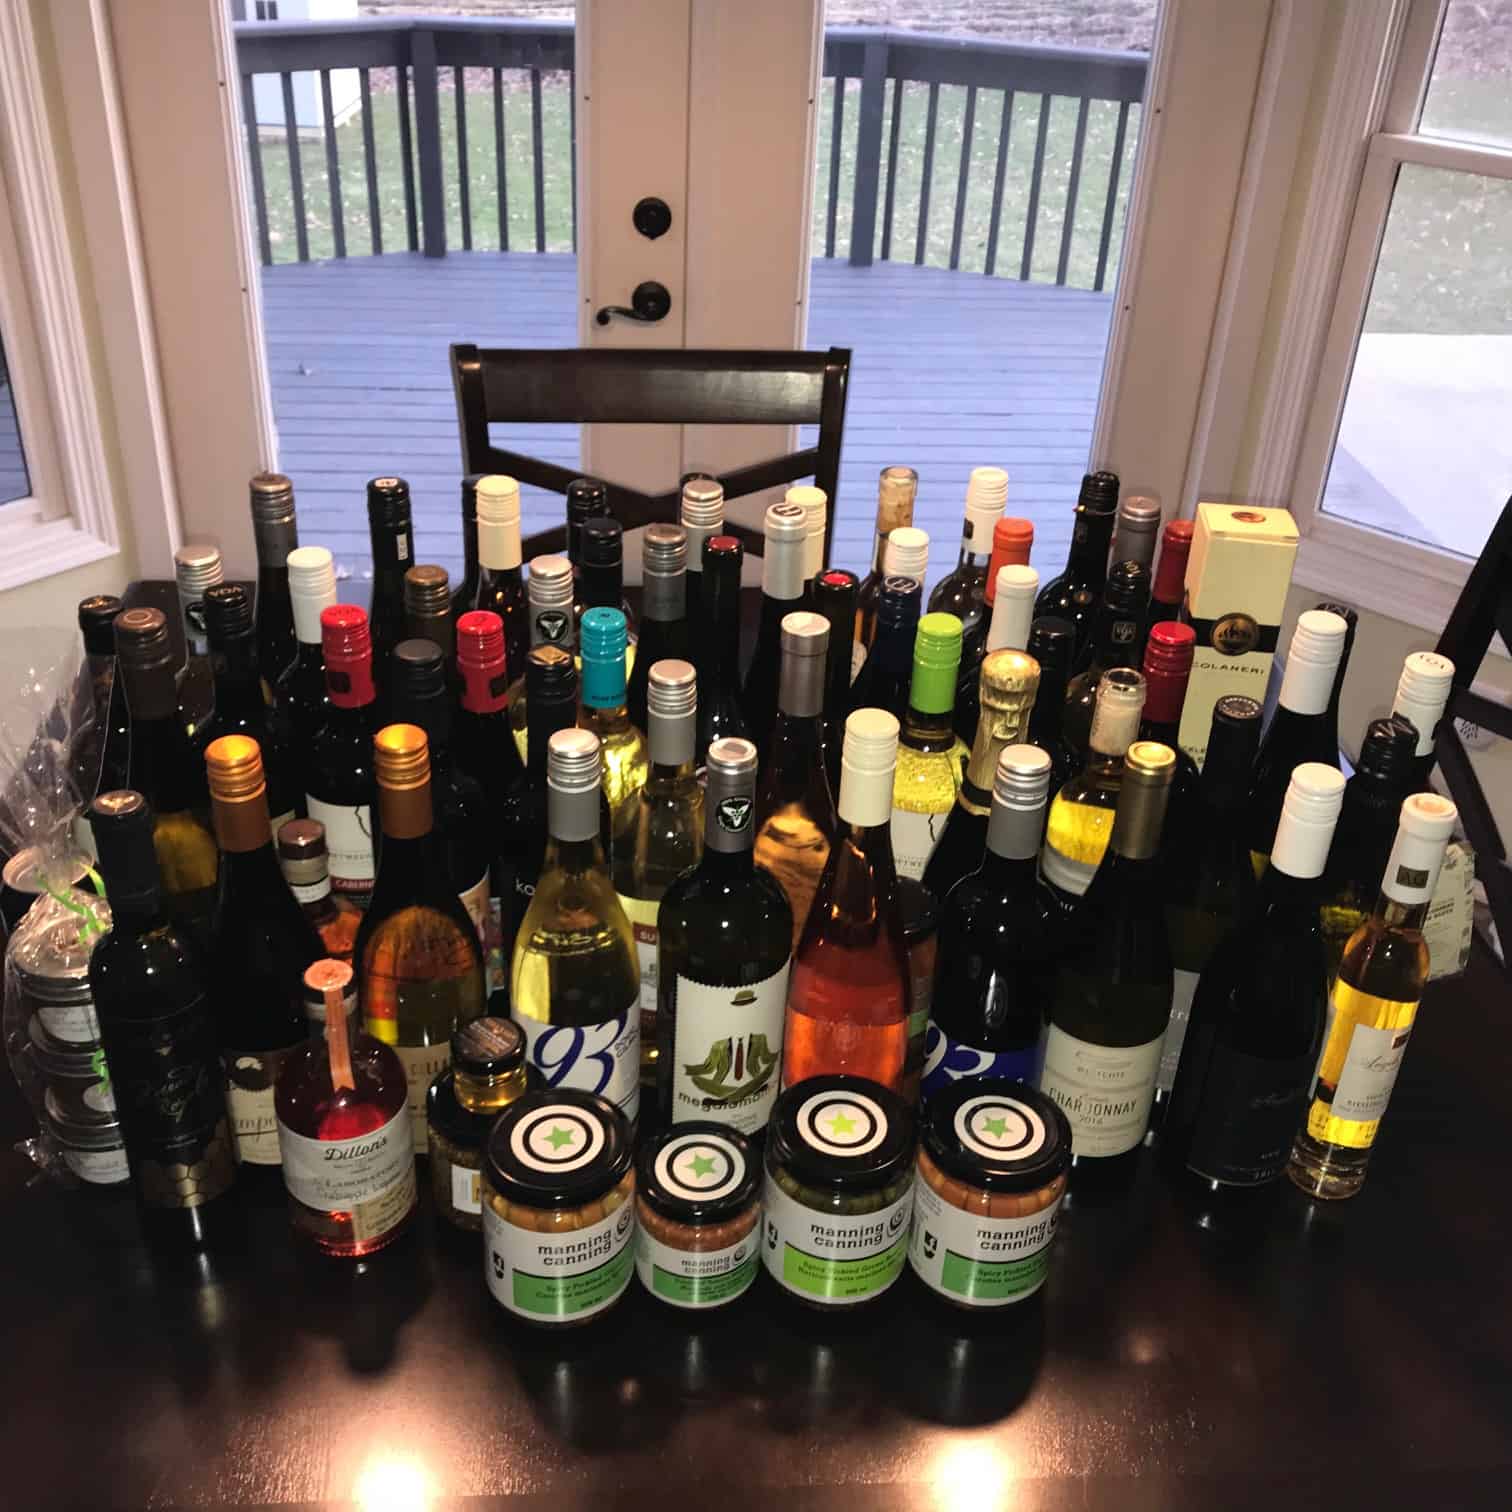 Giant collection of wine bottles lined up on kitchen table 